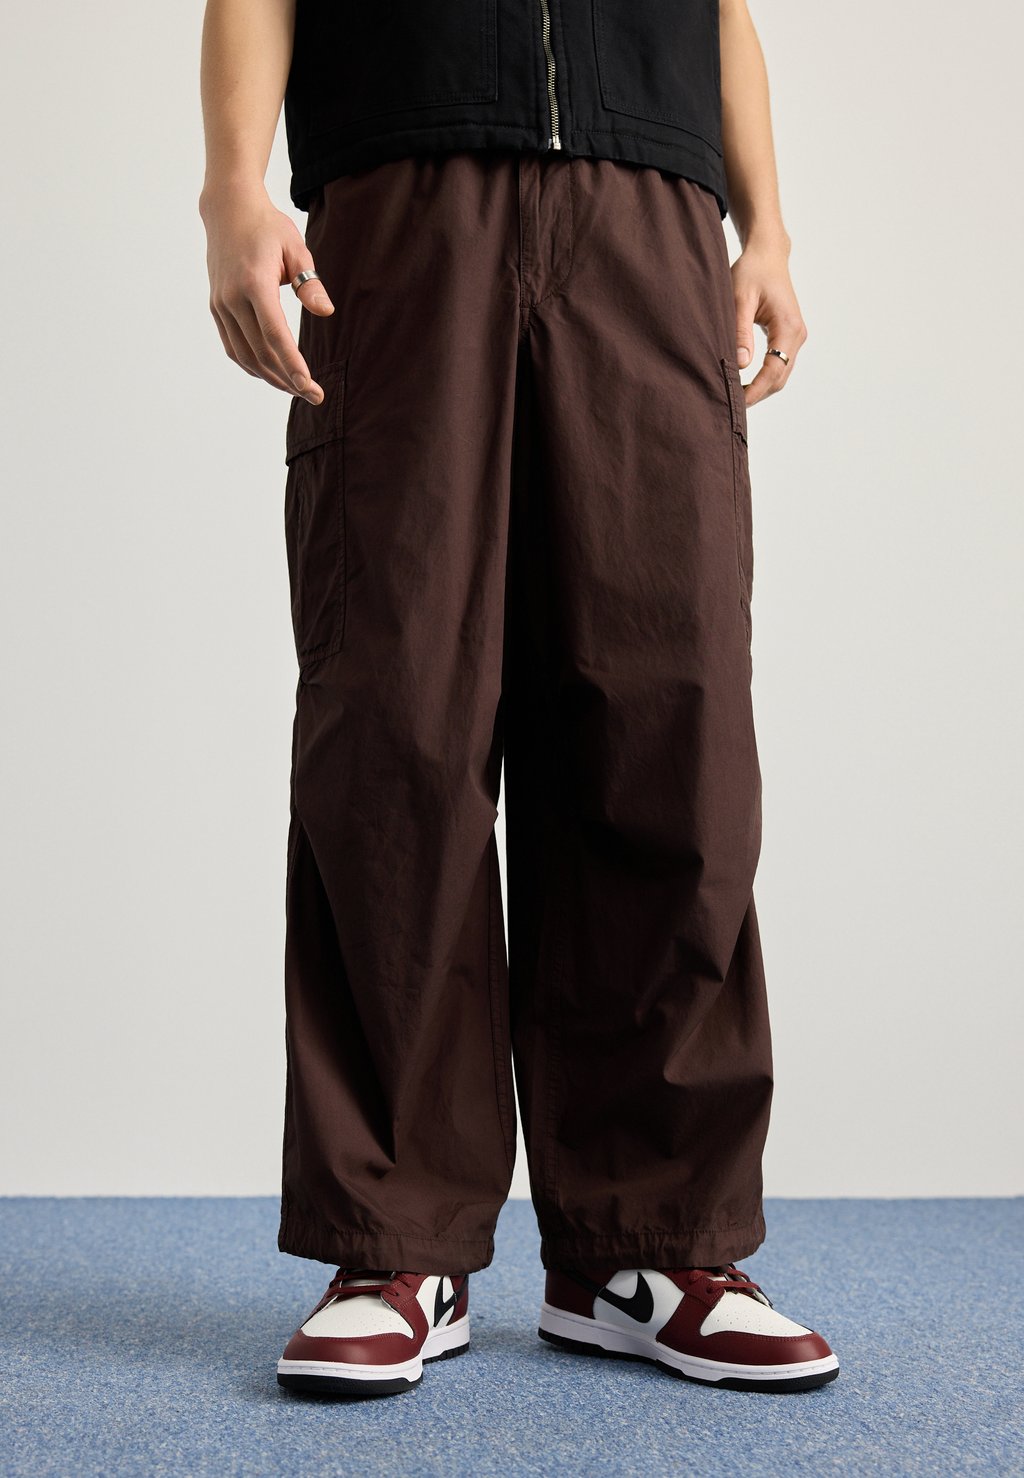 Брюки карго GIANT PARACHUTE PANT Obey Clothing, цвет java brown